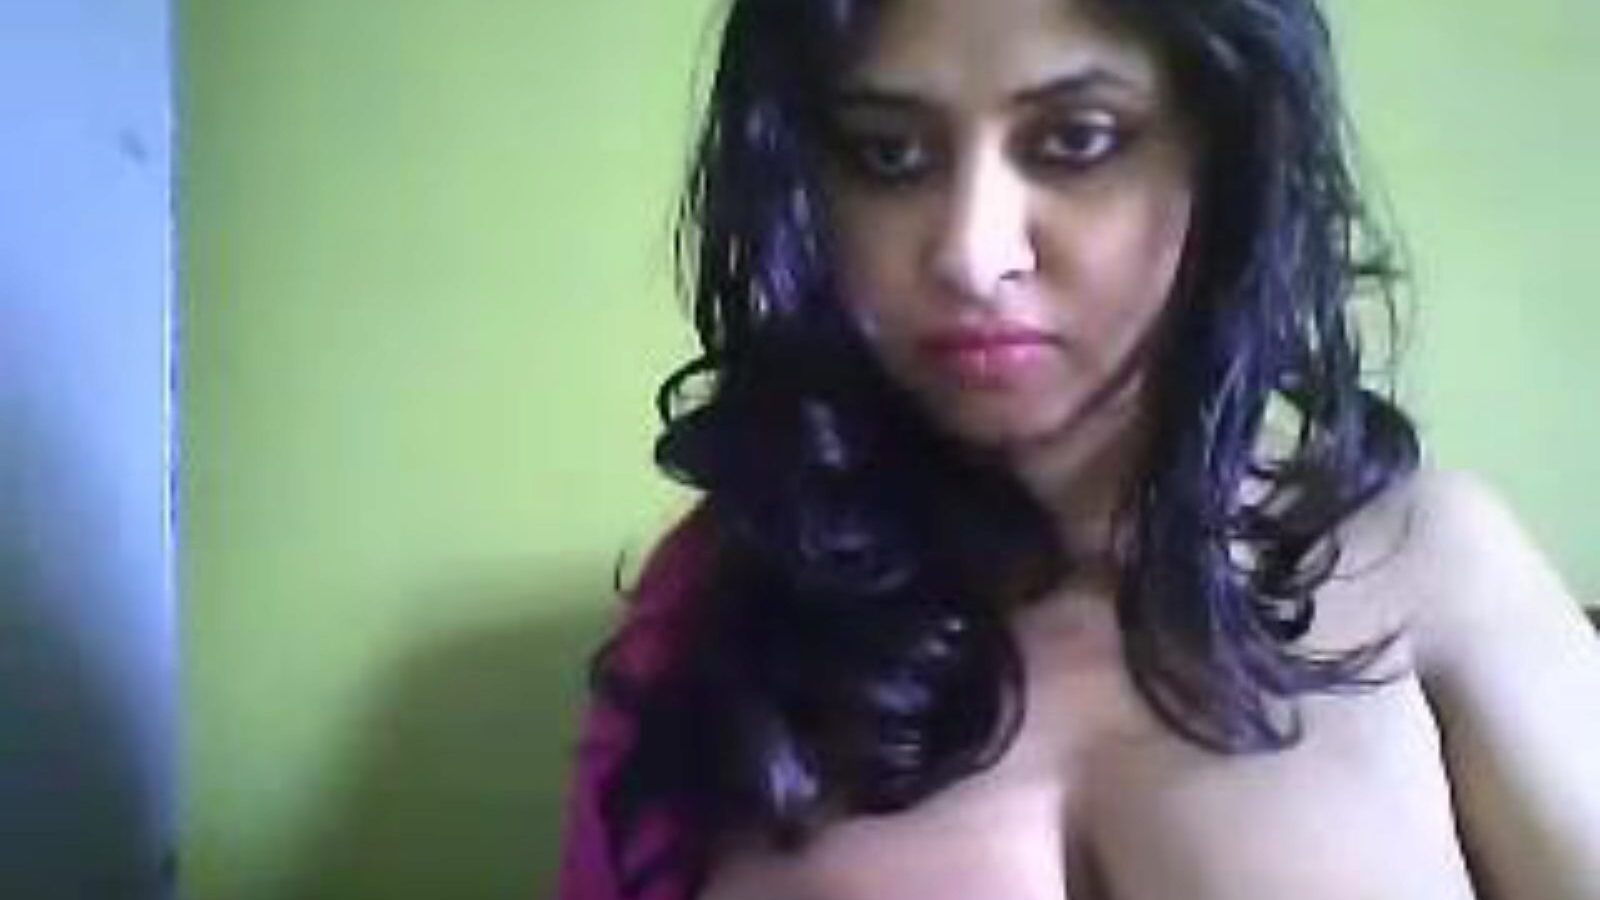 Desi Hot Cam mother I'd like to fuck Deepa, Free Indian Porn 27: xHamster Watch Desi Hot Cam mother I'd like to fuck Deepa episode on xHamster, the biggest hookup tube web site with tons of free-for-all Asian Indian & Xxx Hot porn videos